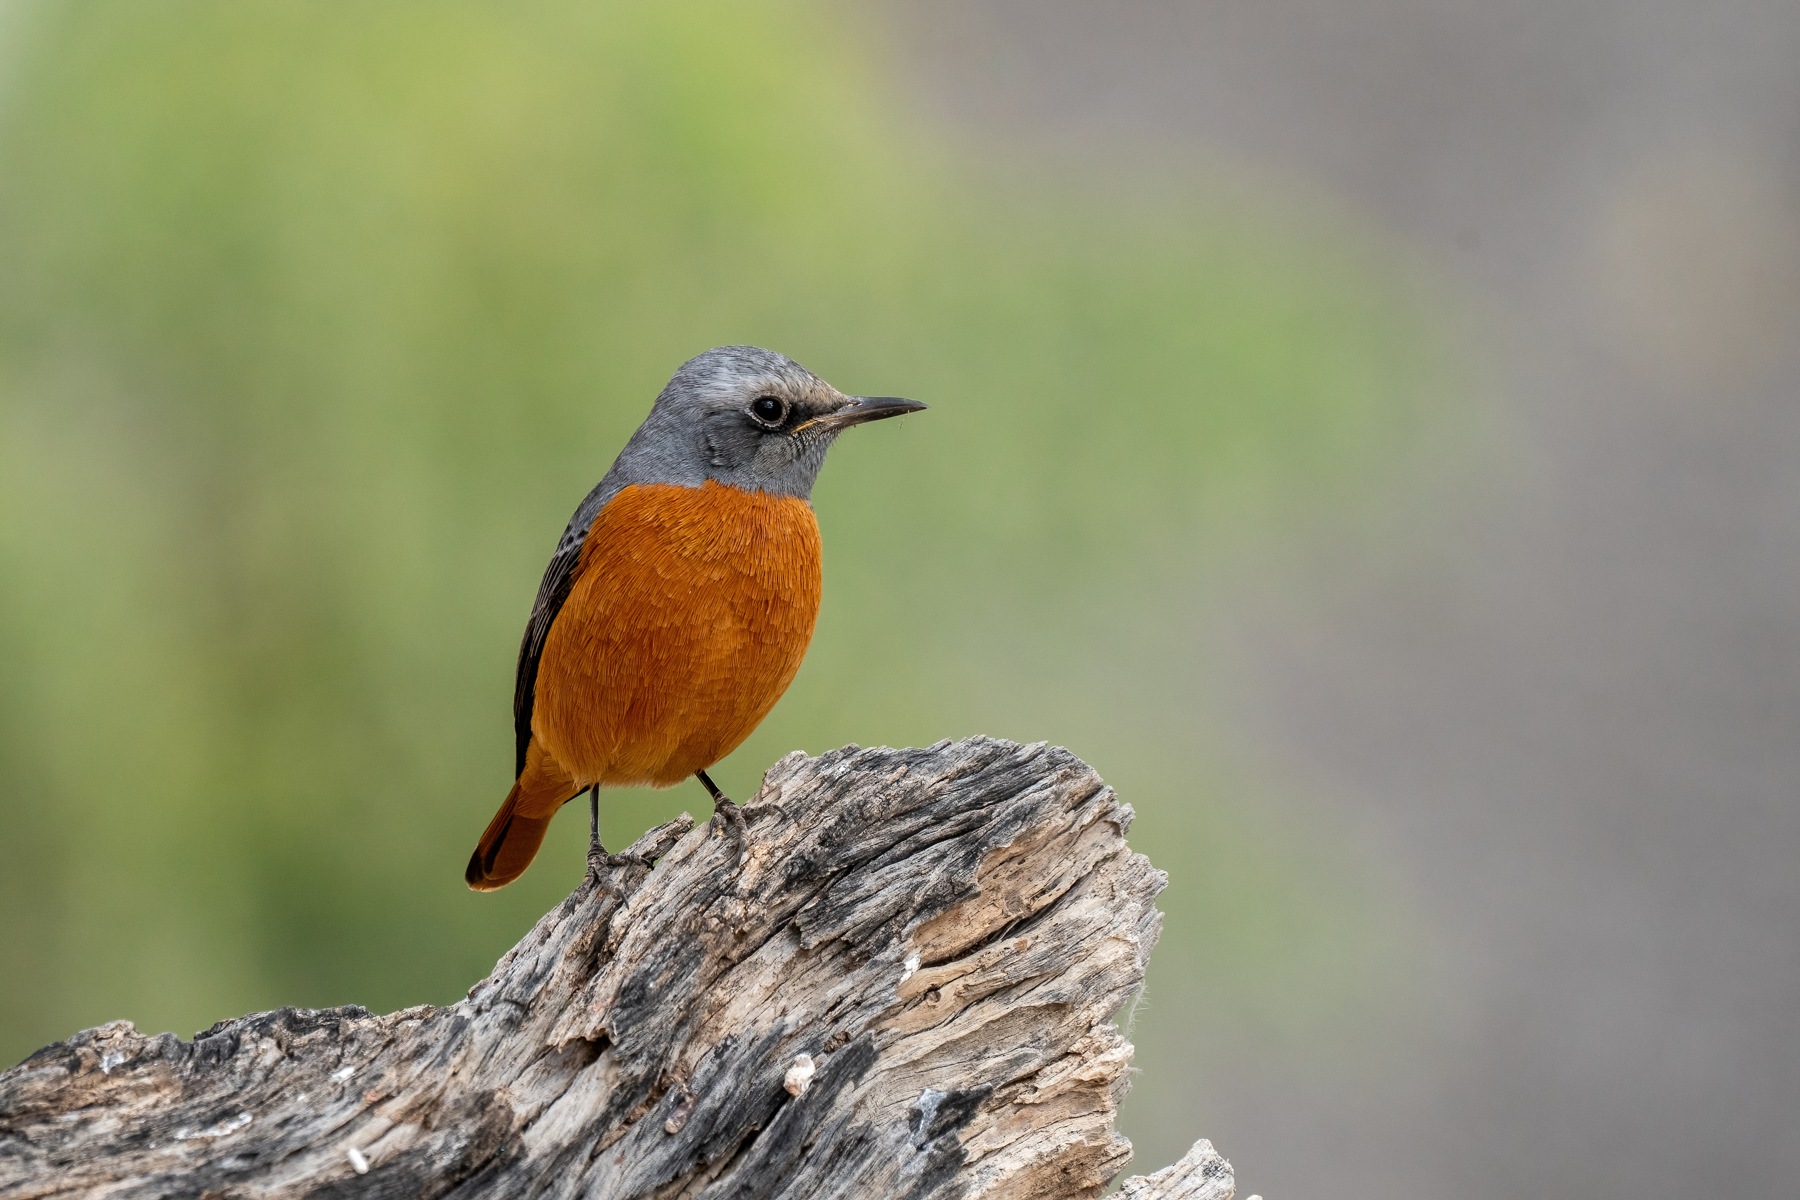 Short-toed Rock Thrushes are a common bird of Namibia's stony deserts